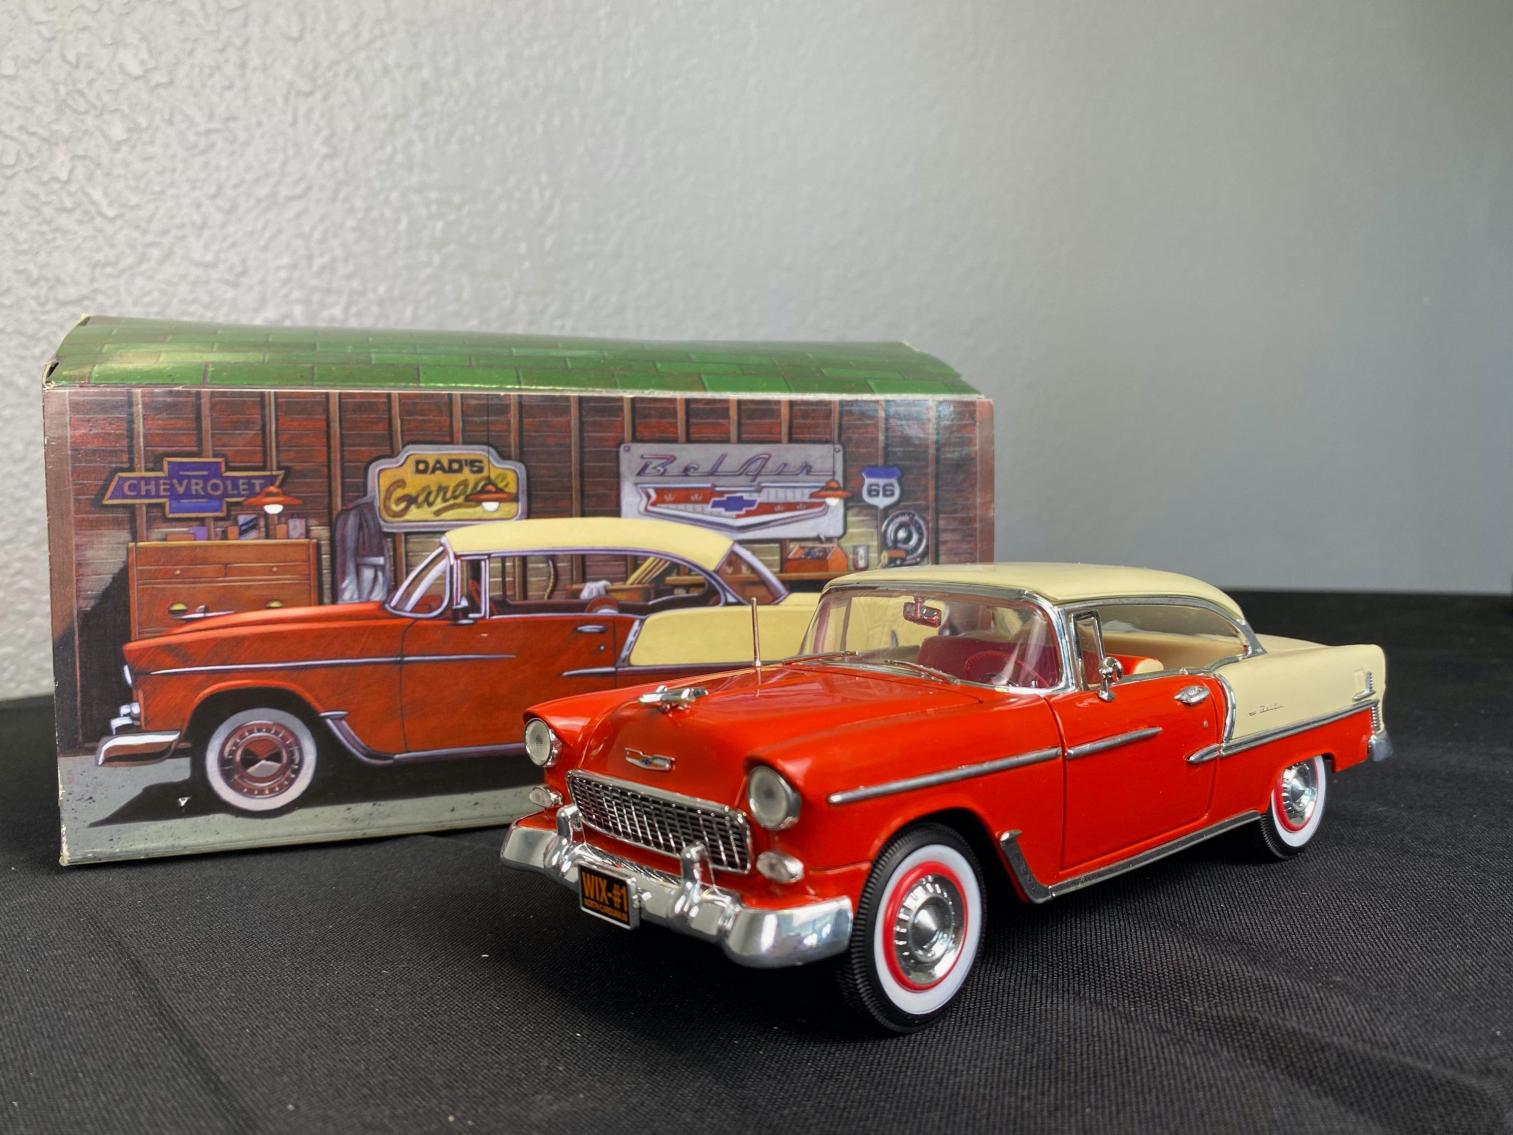 Vintage Collector Cars & Toys, Road Signs, Farmhouse Antiques, Vinyl Records & More!